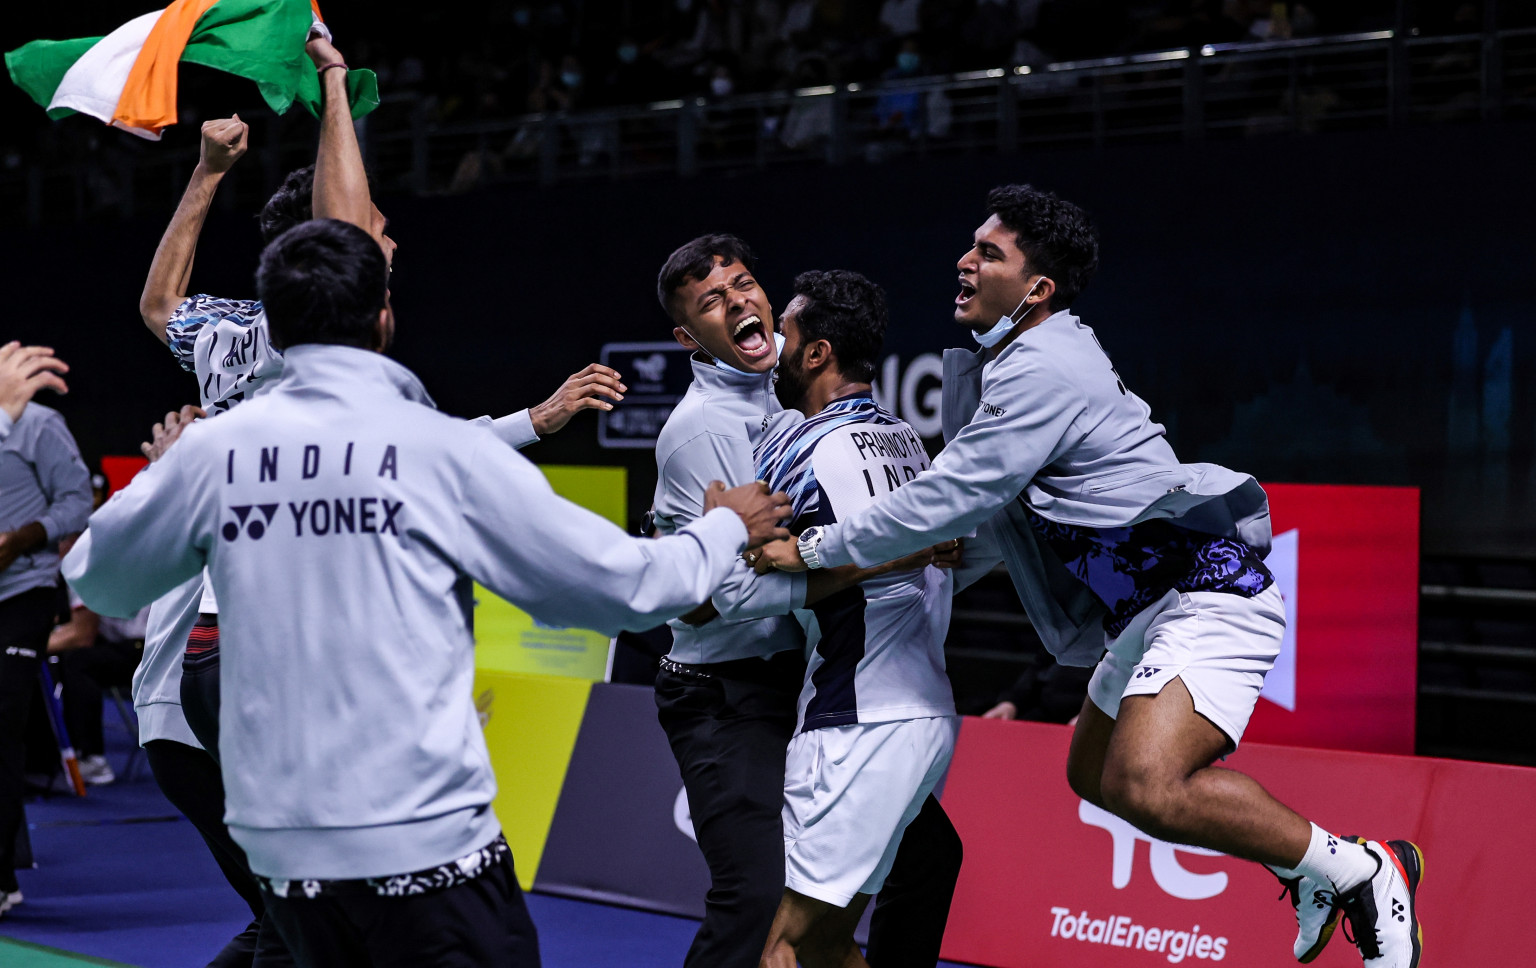 Thomas Cup Quarterfinals LIVE: India SCRIPT HISTORY, beat five-time champion Malaysia to reach Thomas Cup SEMIFINALS after 43 years